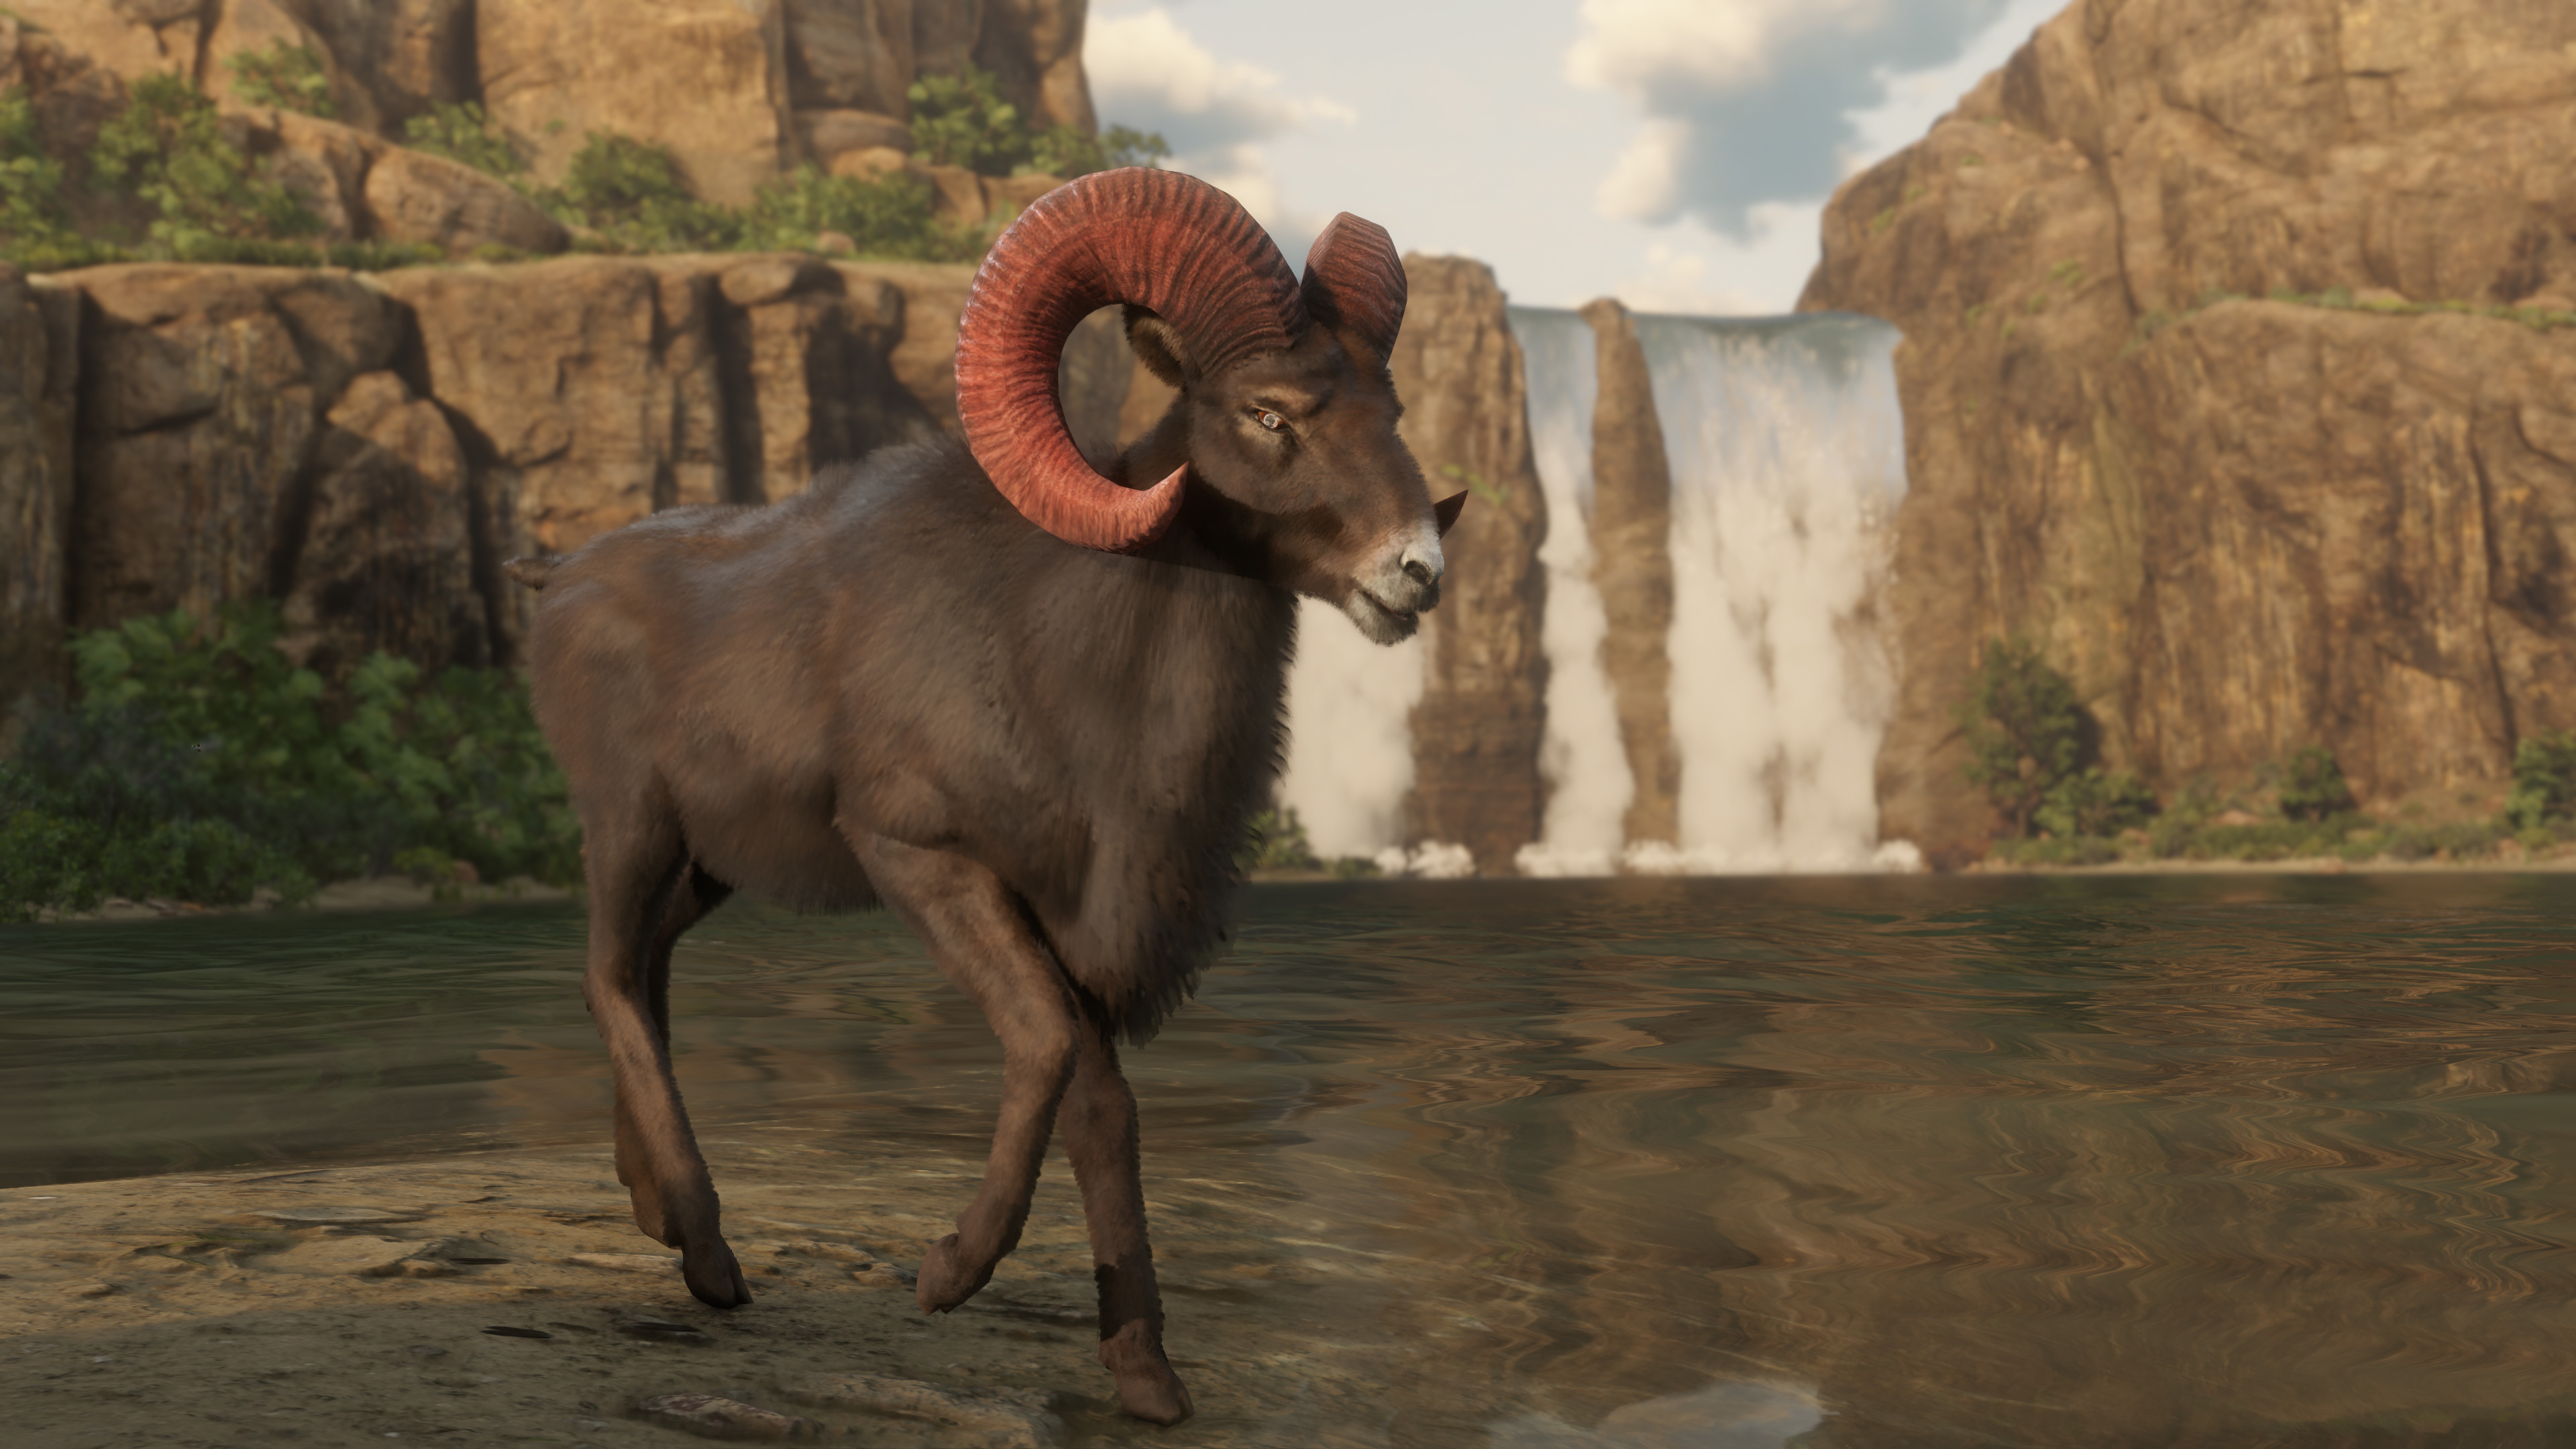 PlayStation Twitter: "PS Plus players who start the Naturalist role in Red Dead Online before September 15 get early access to study, sample or hunt the Legendary Gabbro Ram, Legendary Chalk